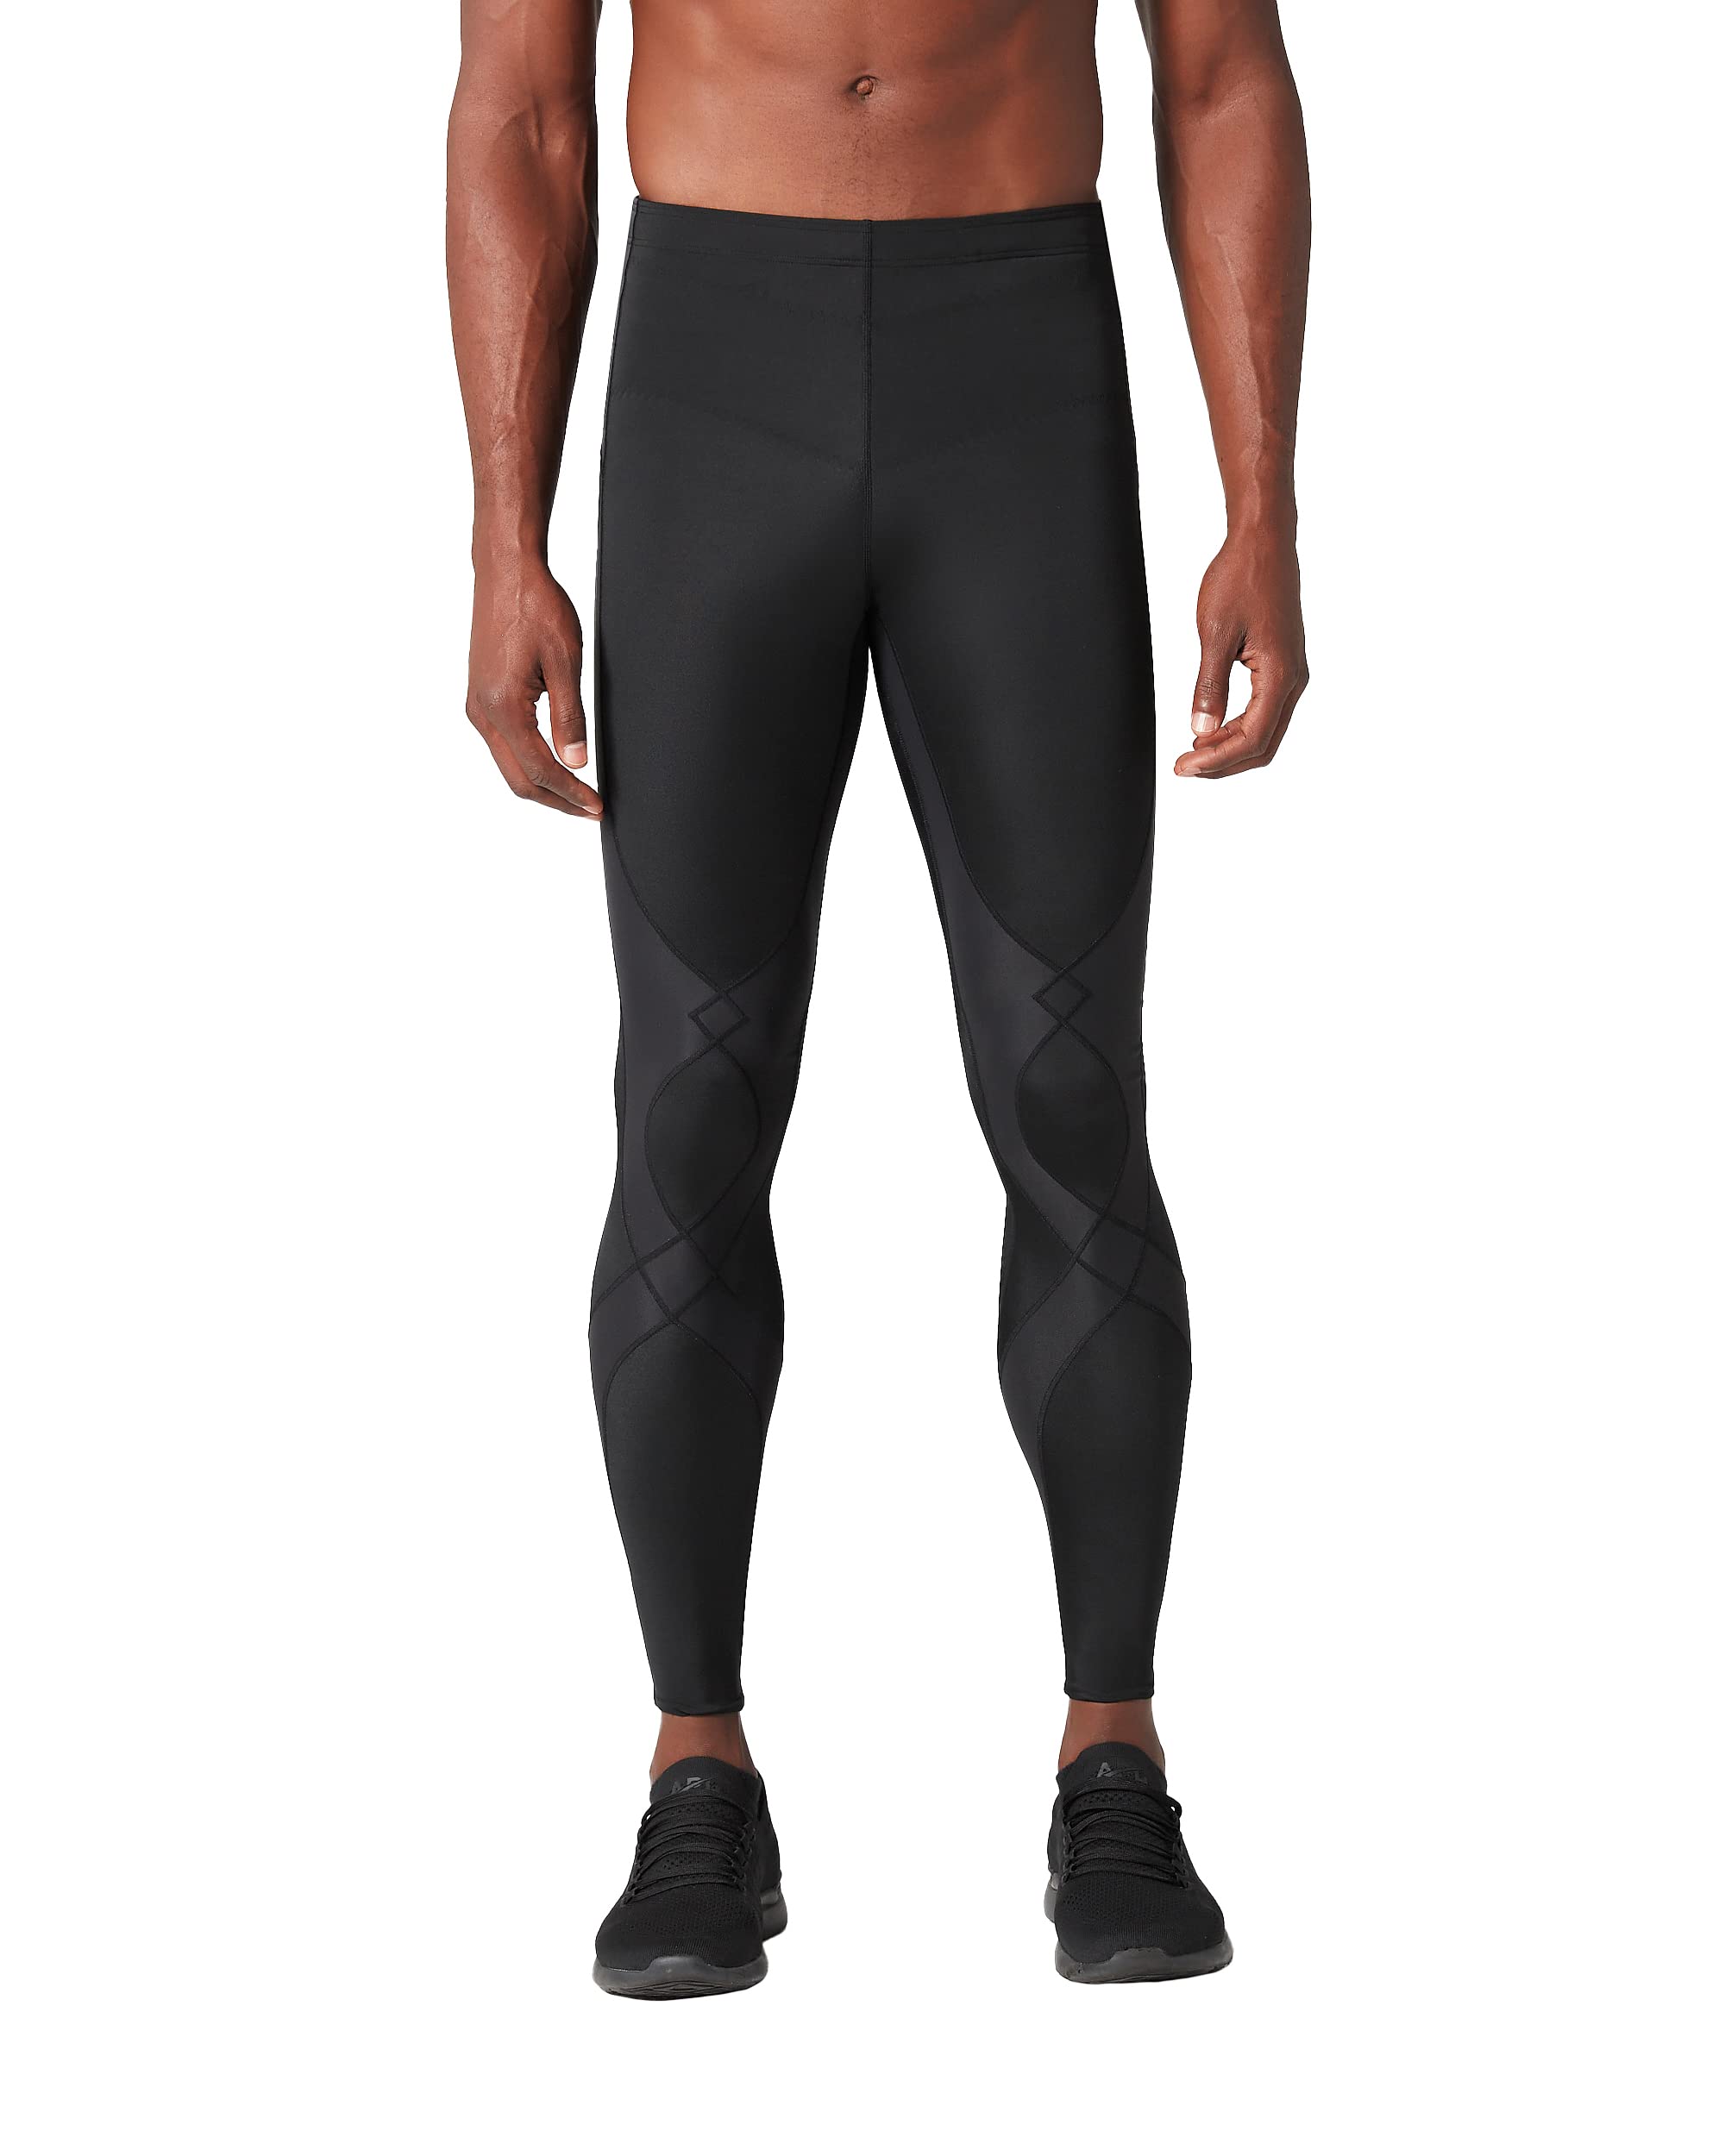 CW-X Men's Stabilyx Joint Support Compression Tights